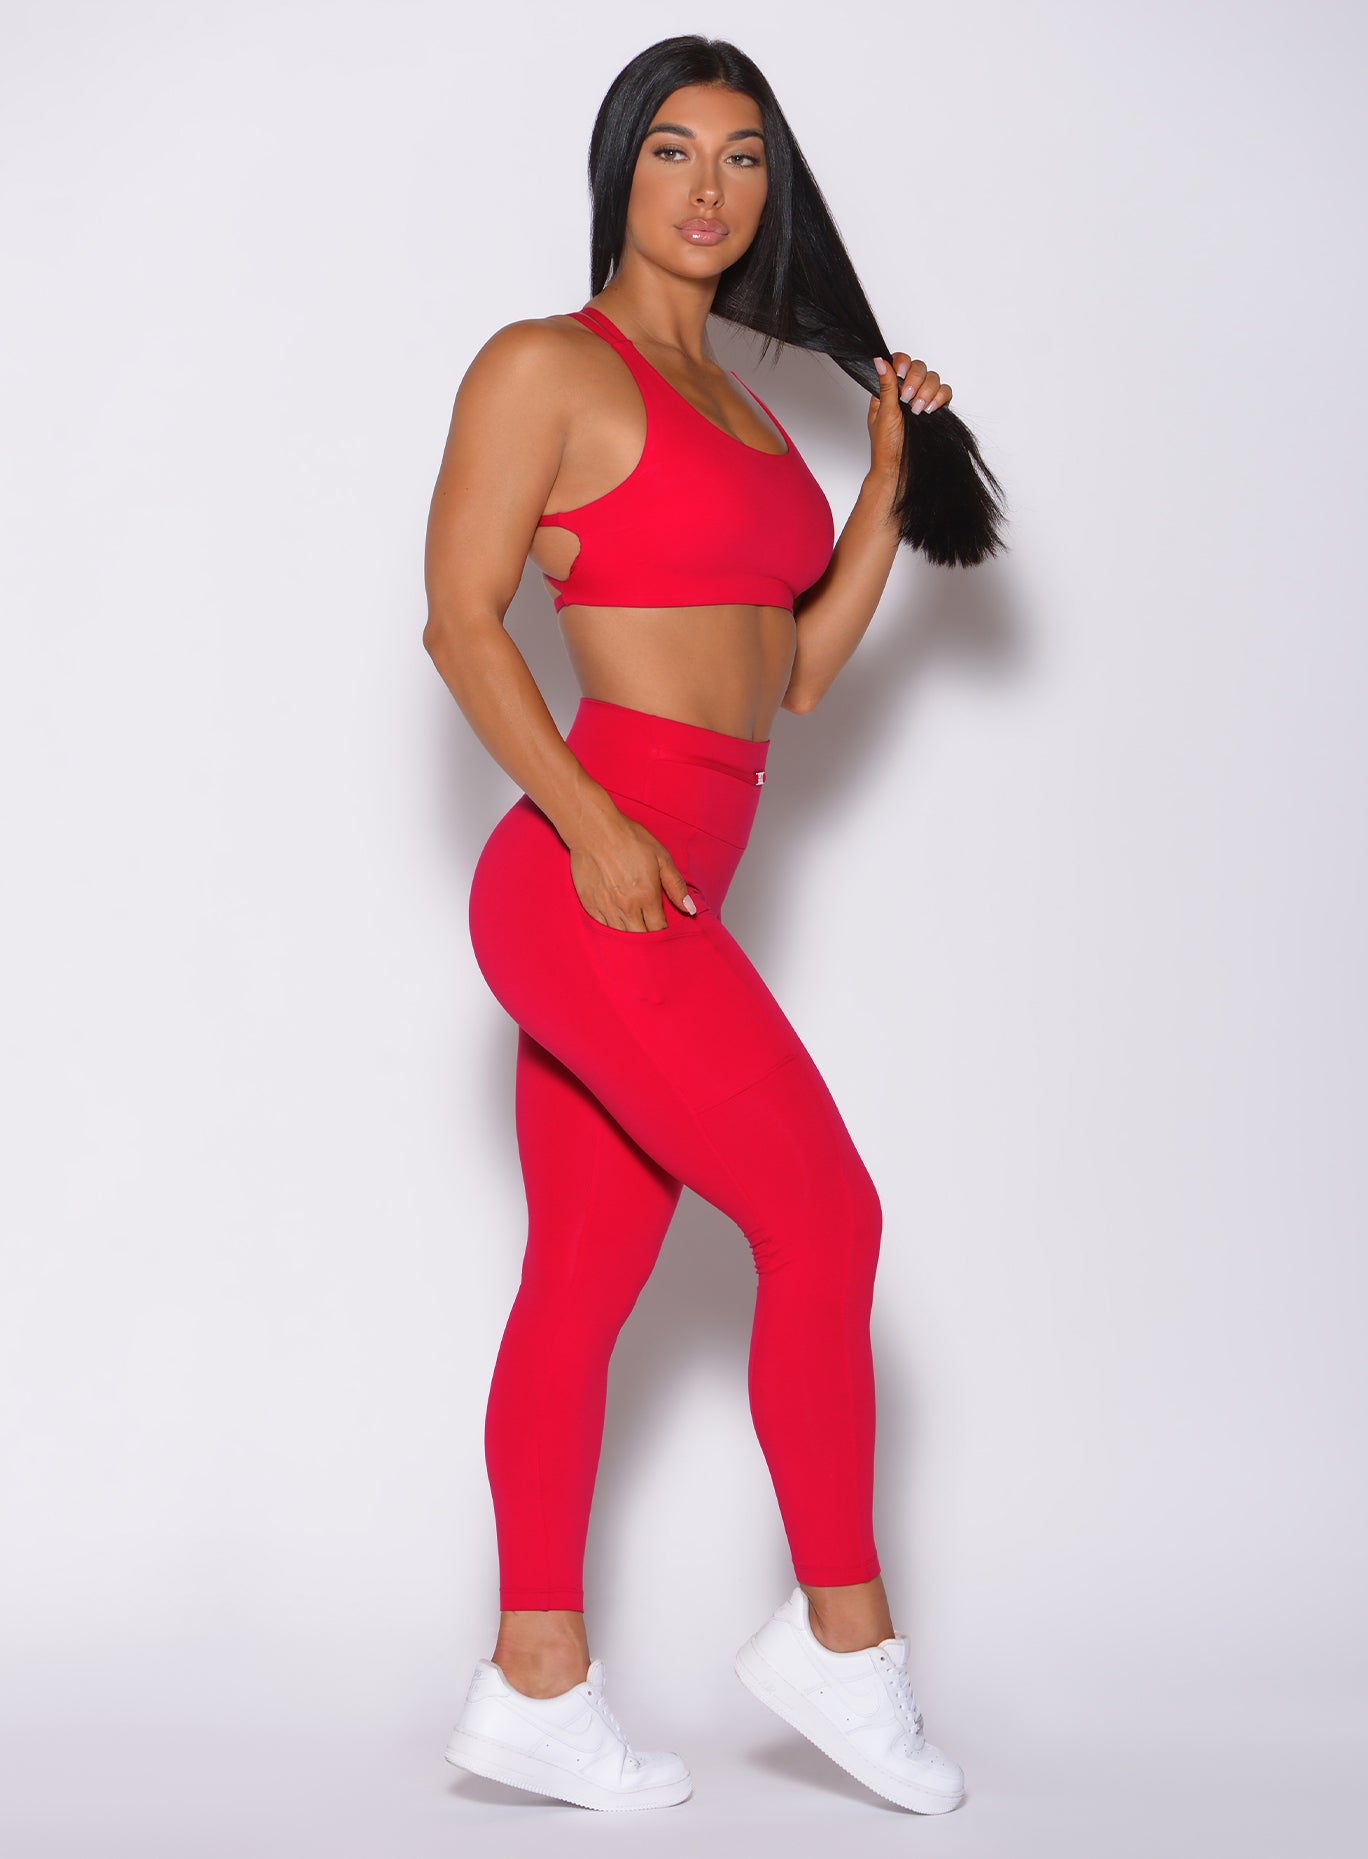 Right side profile view of a model wearing our red barbell leggings and a matching bra